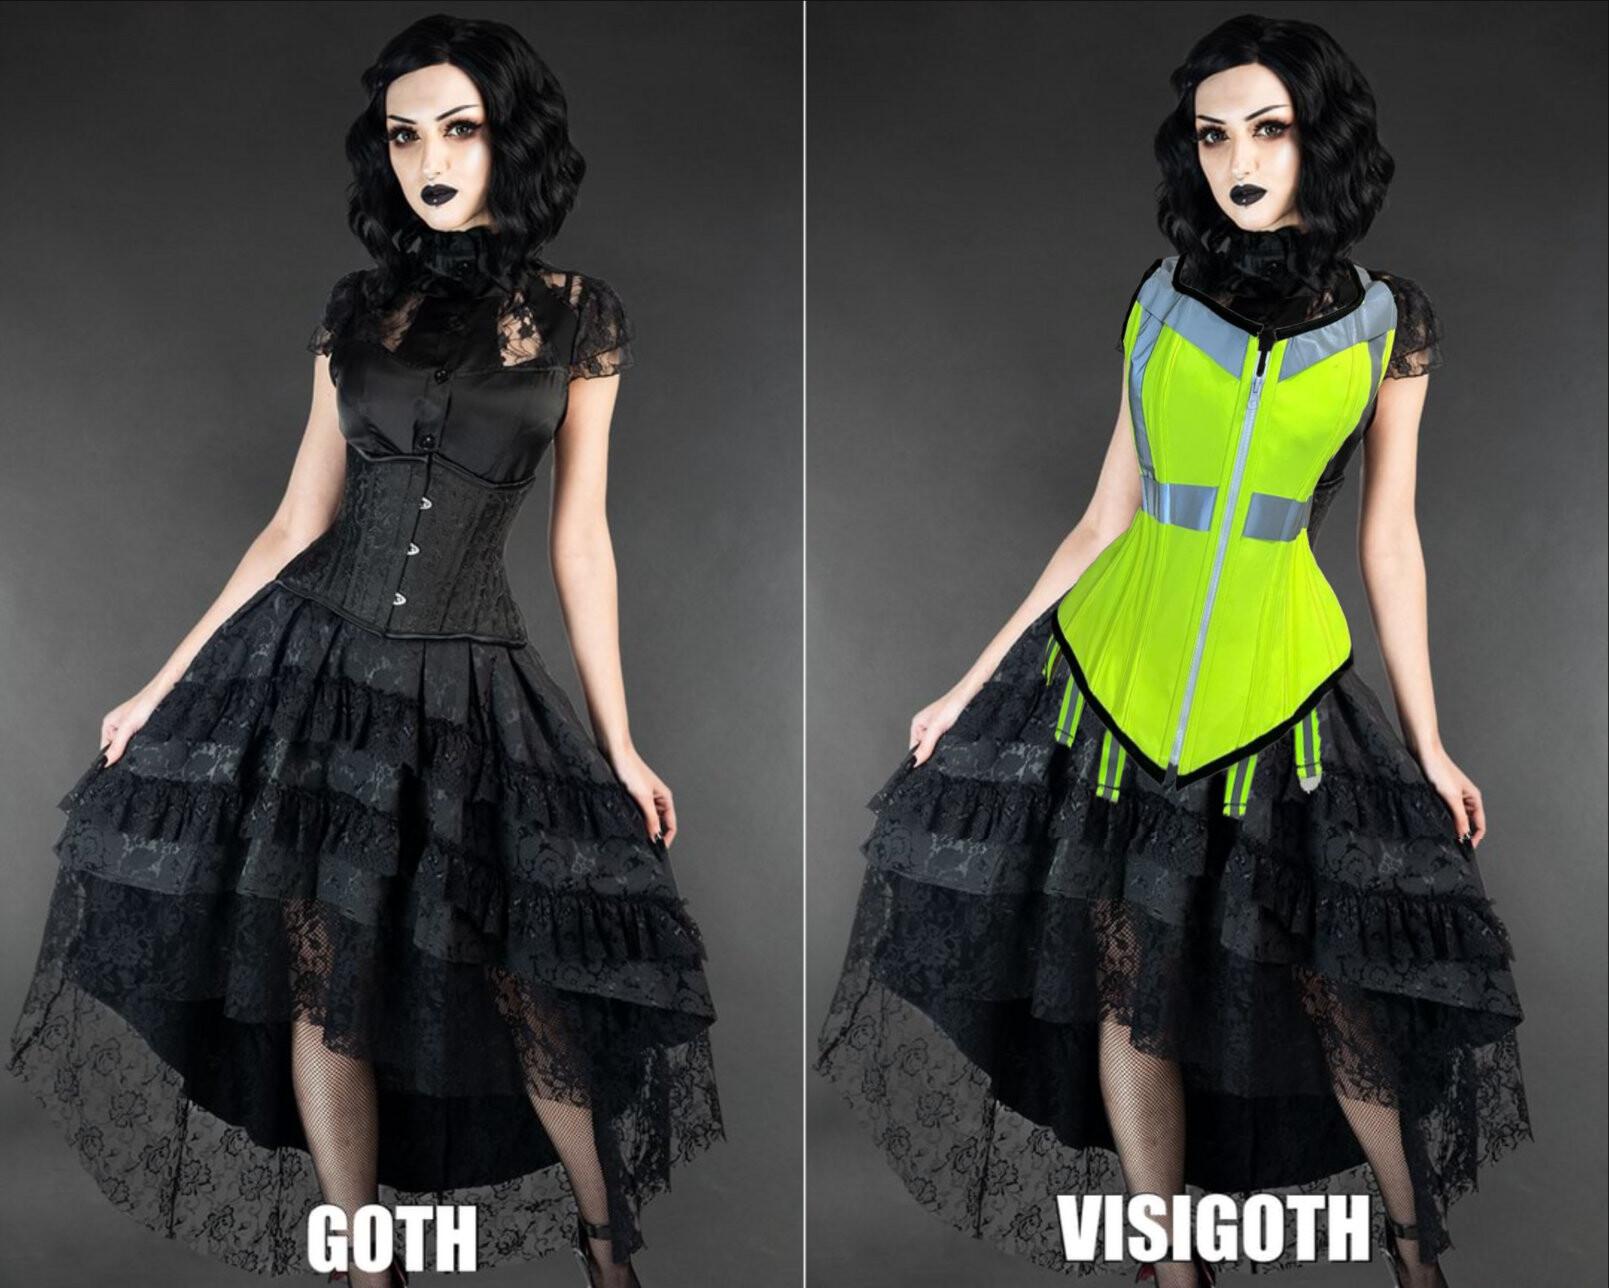 A two-panel meme. On the left is a photo of a goth woman with pale skin, dark makeup, and wavy black hair, wearing a lacy black dress under a black corset; this panel is labeled Goth. On the right is the same photo, only with a corset crafted from reflective yellow high-vis material with reflective grey accents slightly clumsily edited over the original corset; this panel is labeled Visigoth.